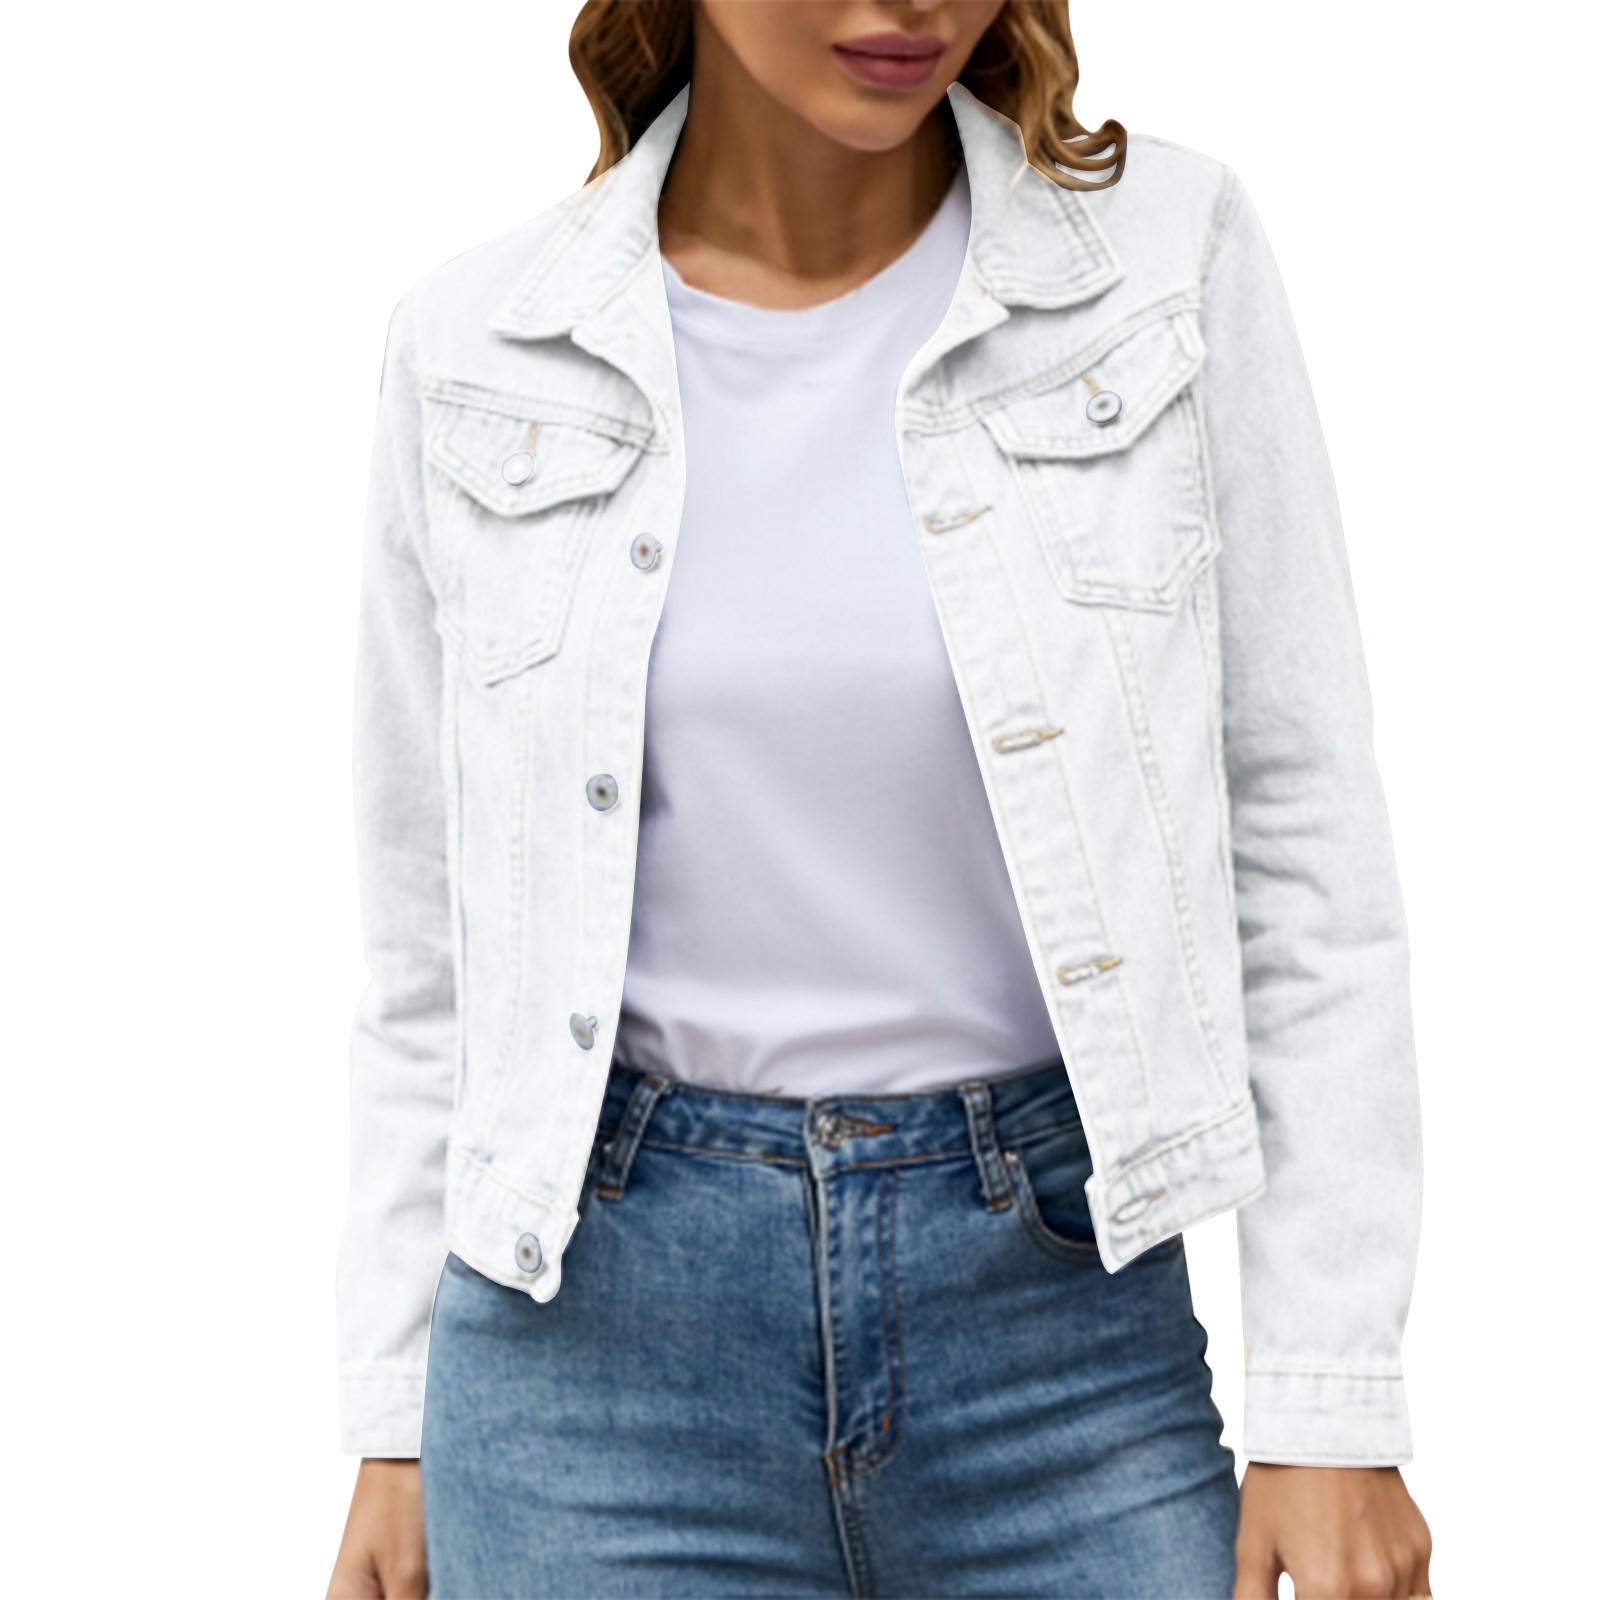 iOPQO womens sweaters Women's Basic Solid Color Button Down Denim Cotton Jacket With Pockets Denim Jacket Coat Women's Denim Jackets White XXL - image 3 of 8